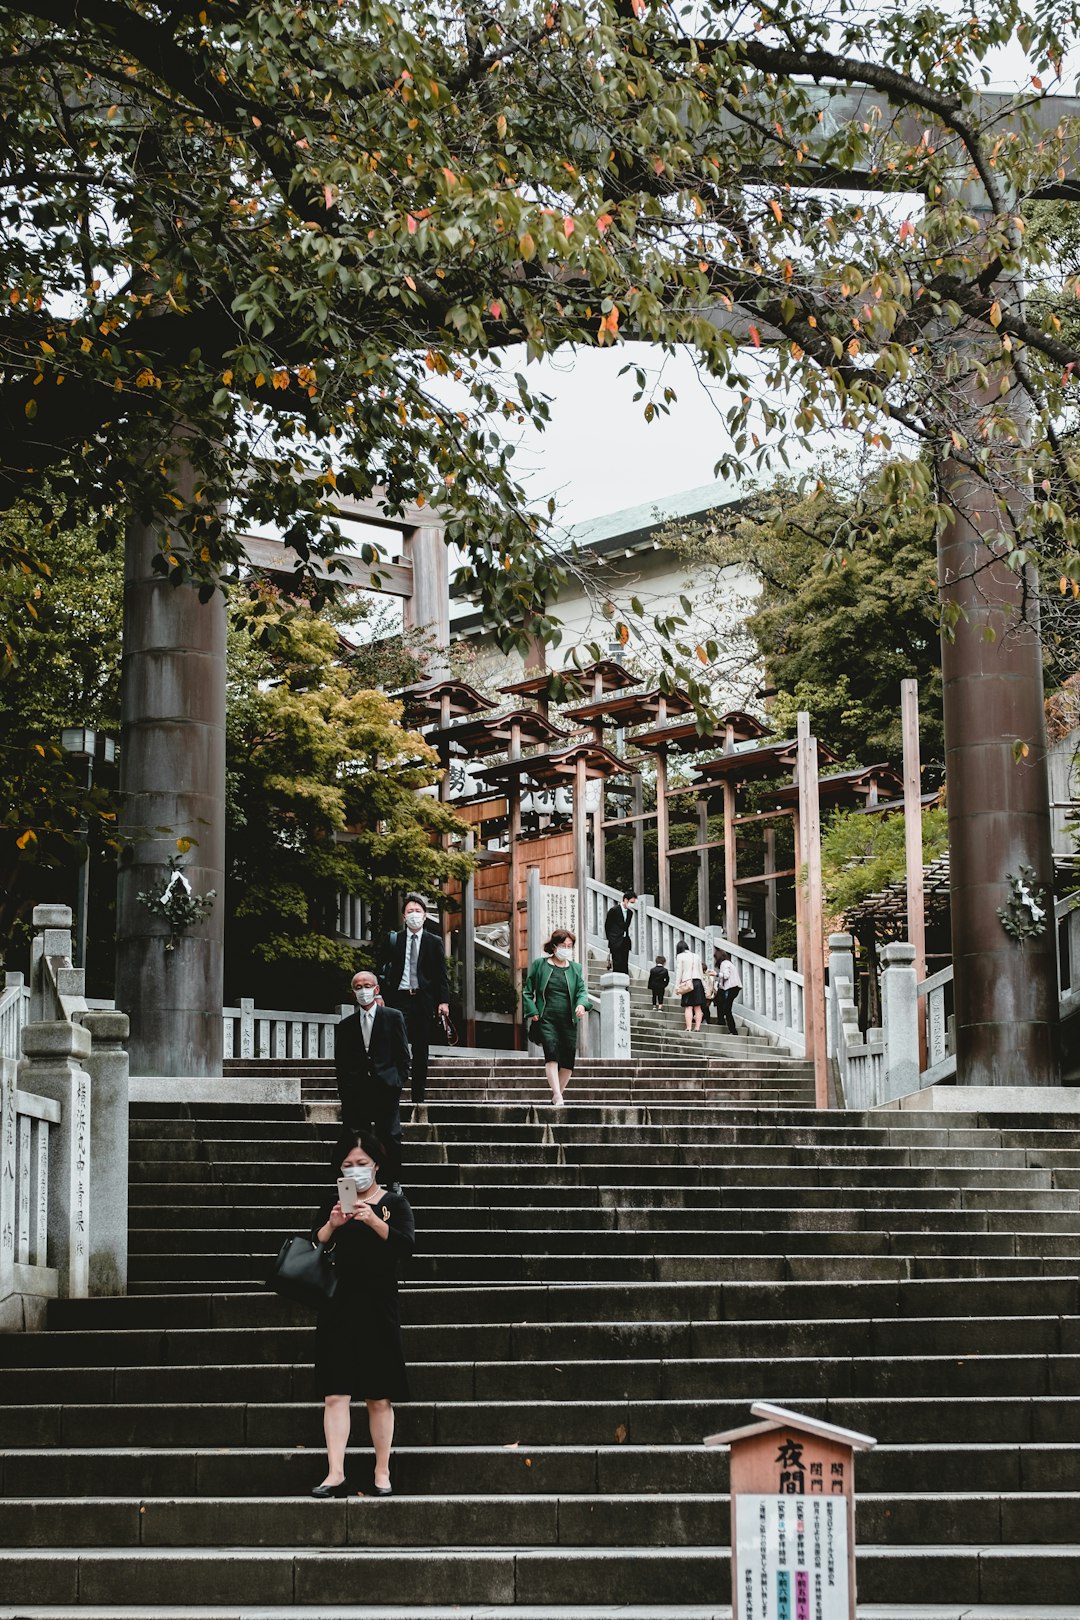 people walking on stairs near building during daytime